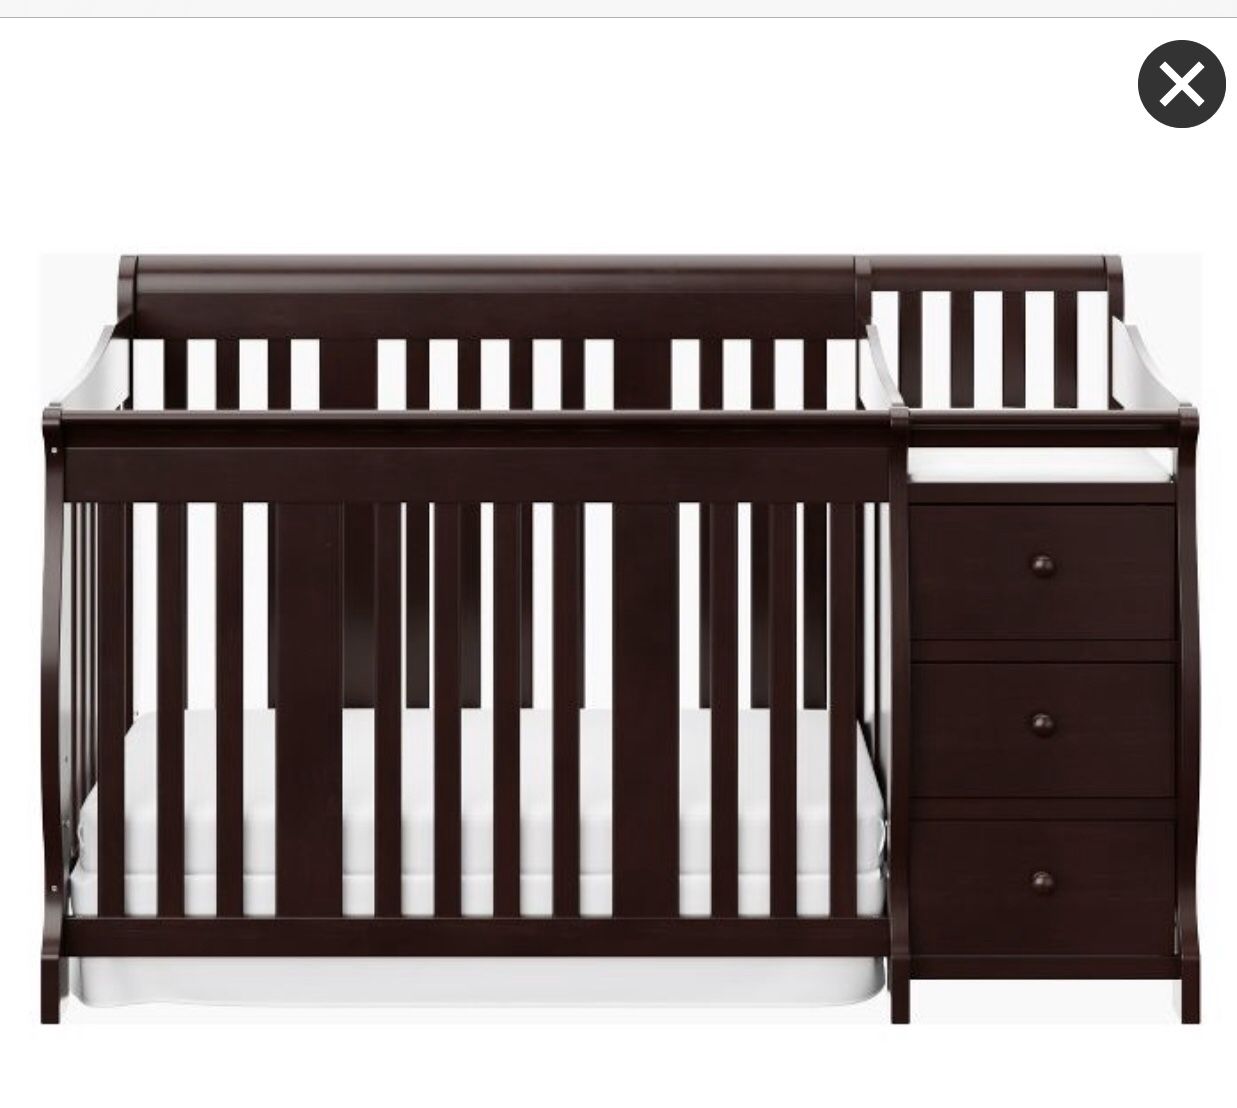 Storkcraft Portofino 4 in 1 convertible crib and changing table.